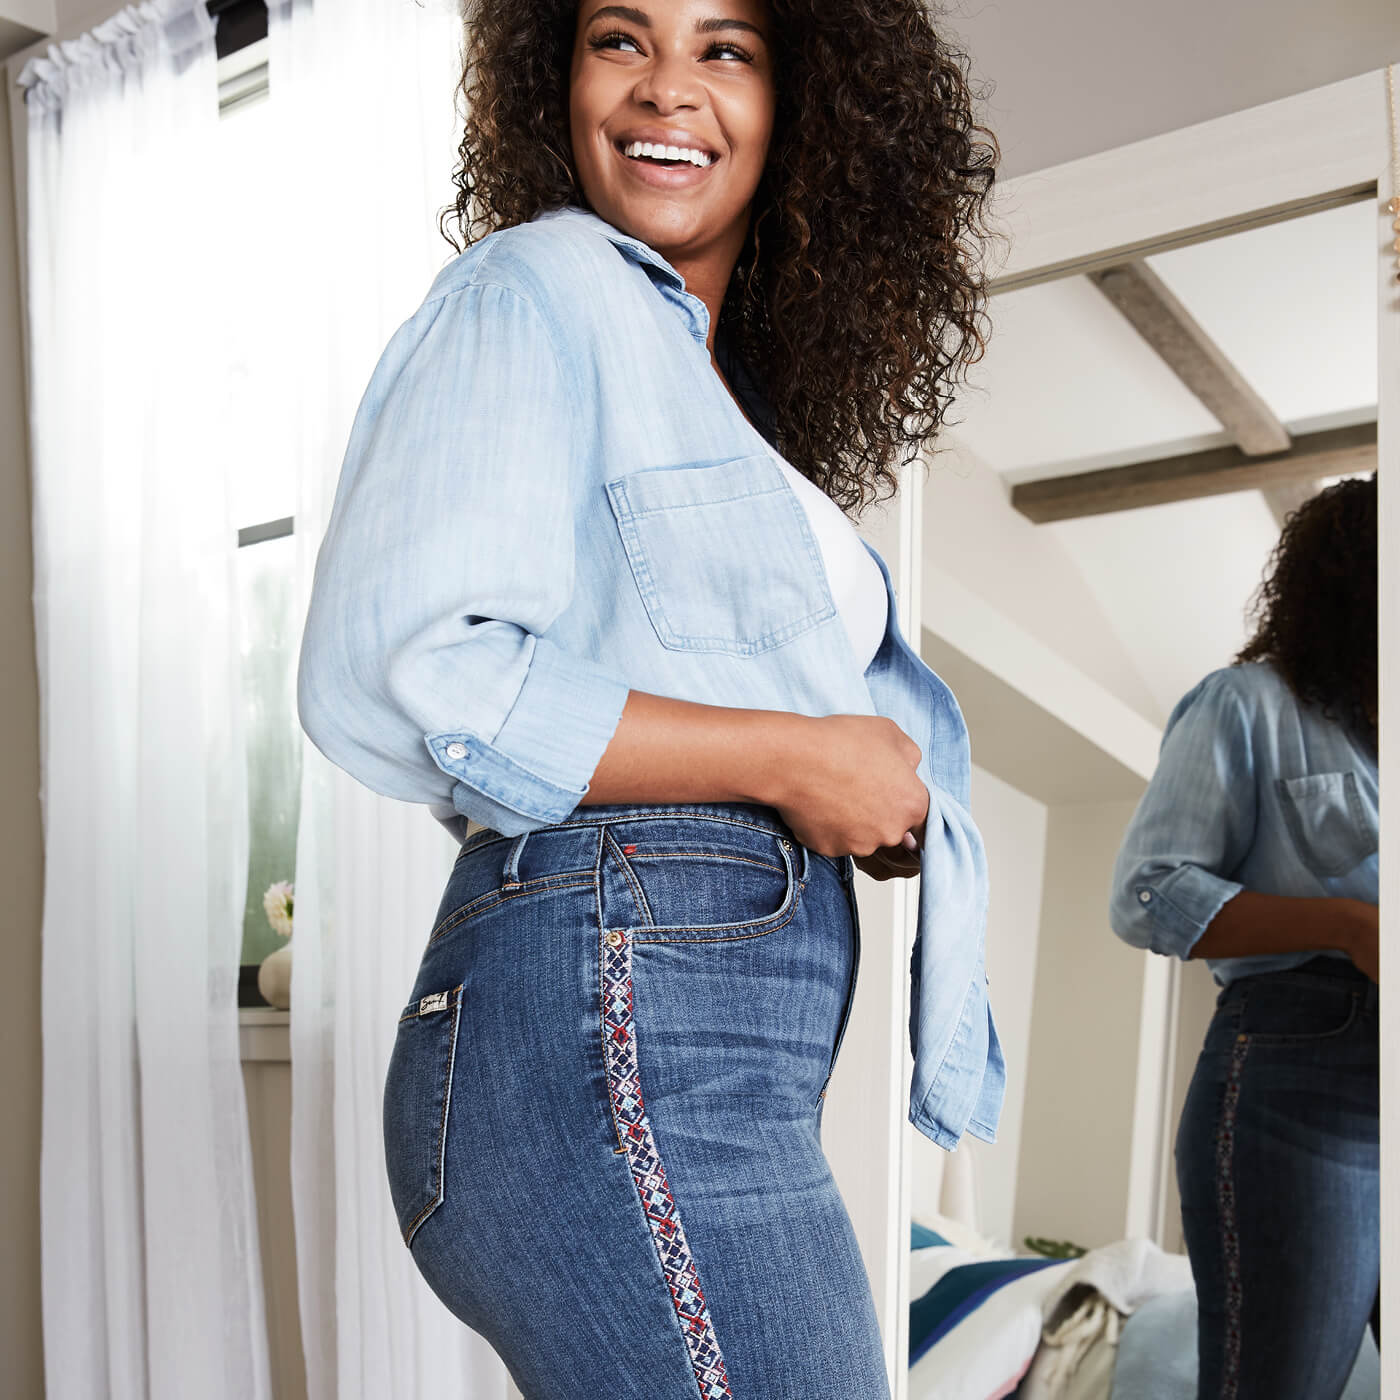 Best Jeans for Curvy Women: 5 different styles - faishon guide